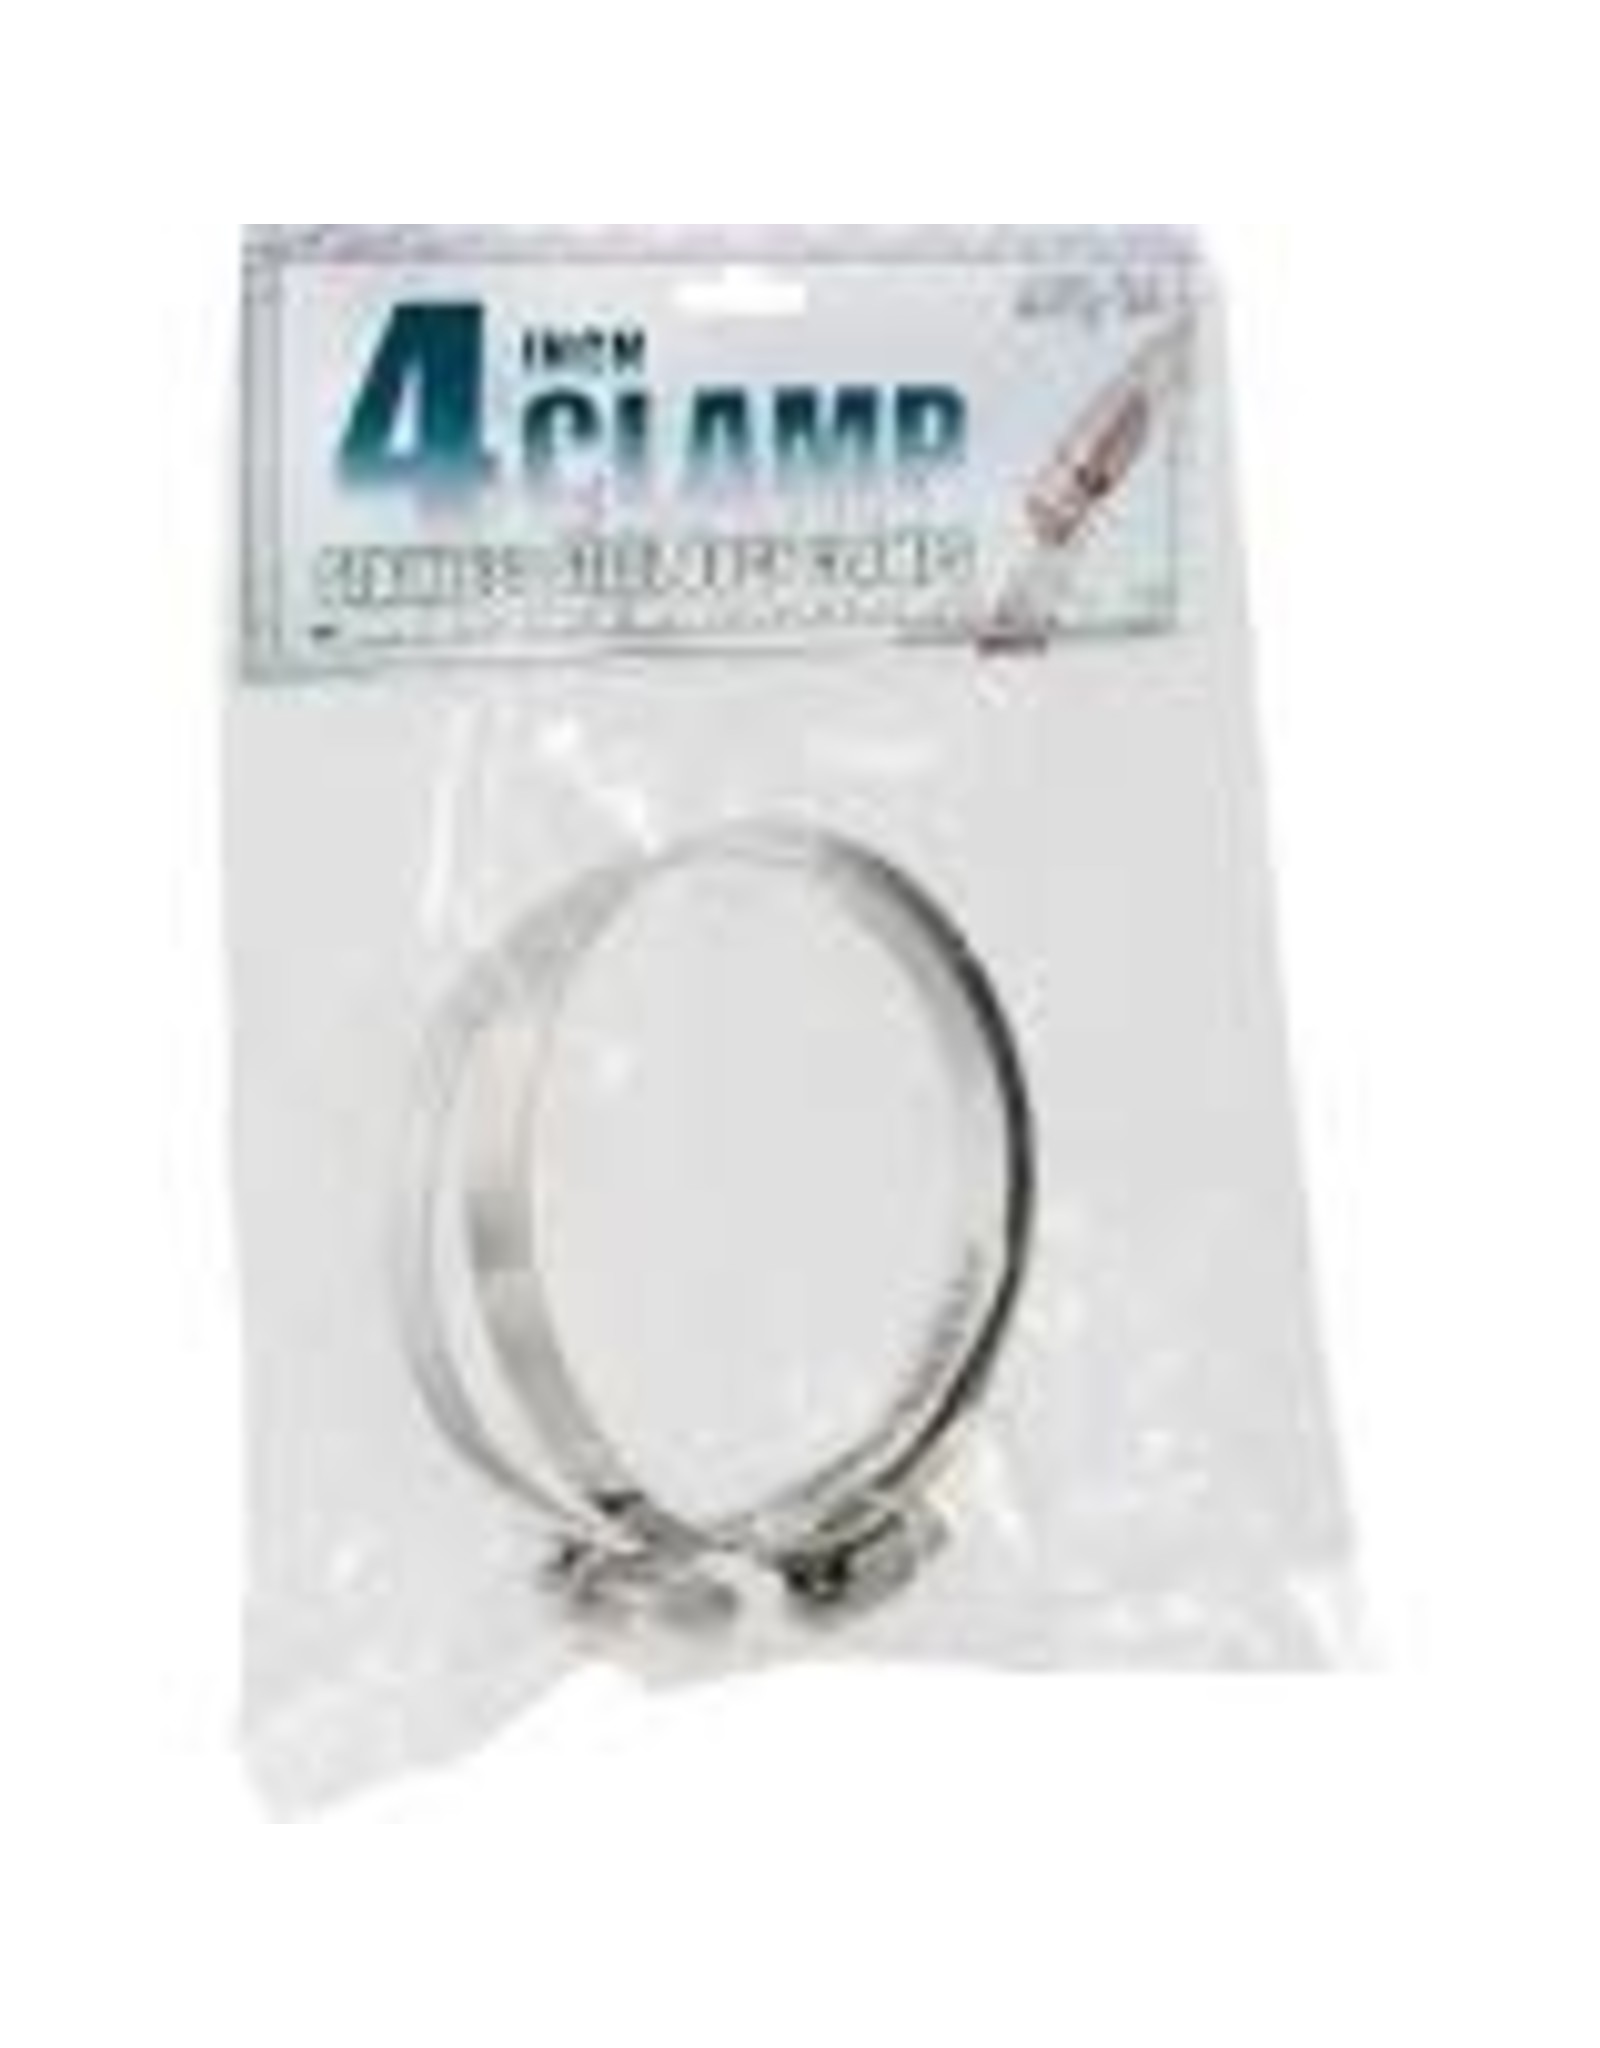 Hydrofarm Stainless Steel Duct Clamps - 4